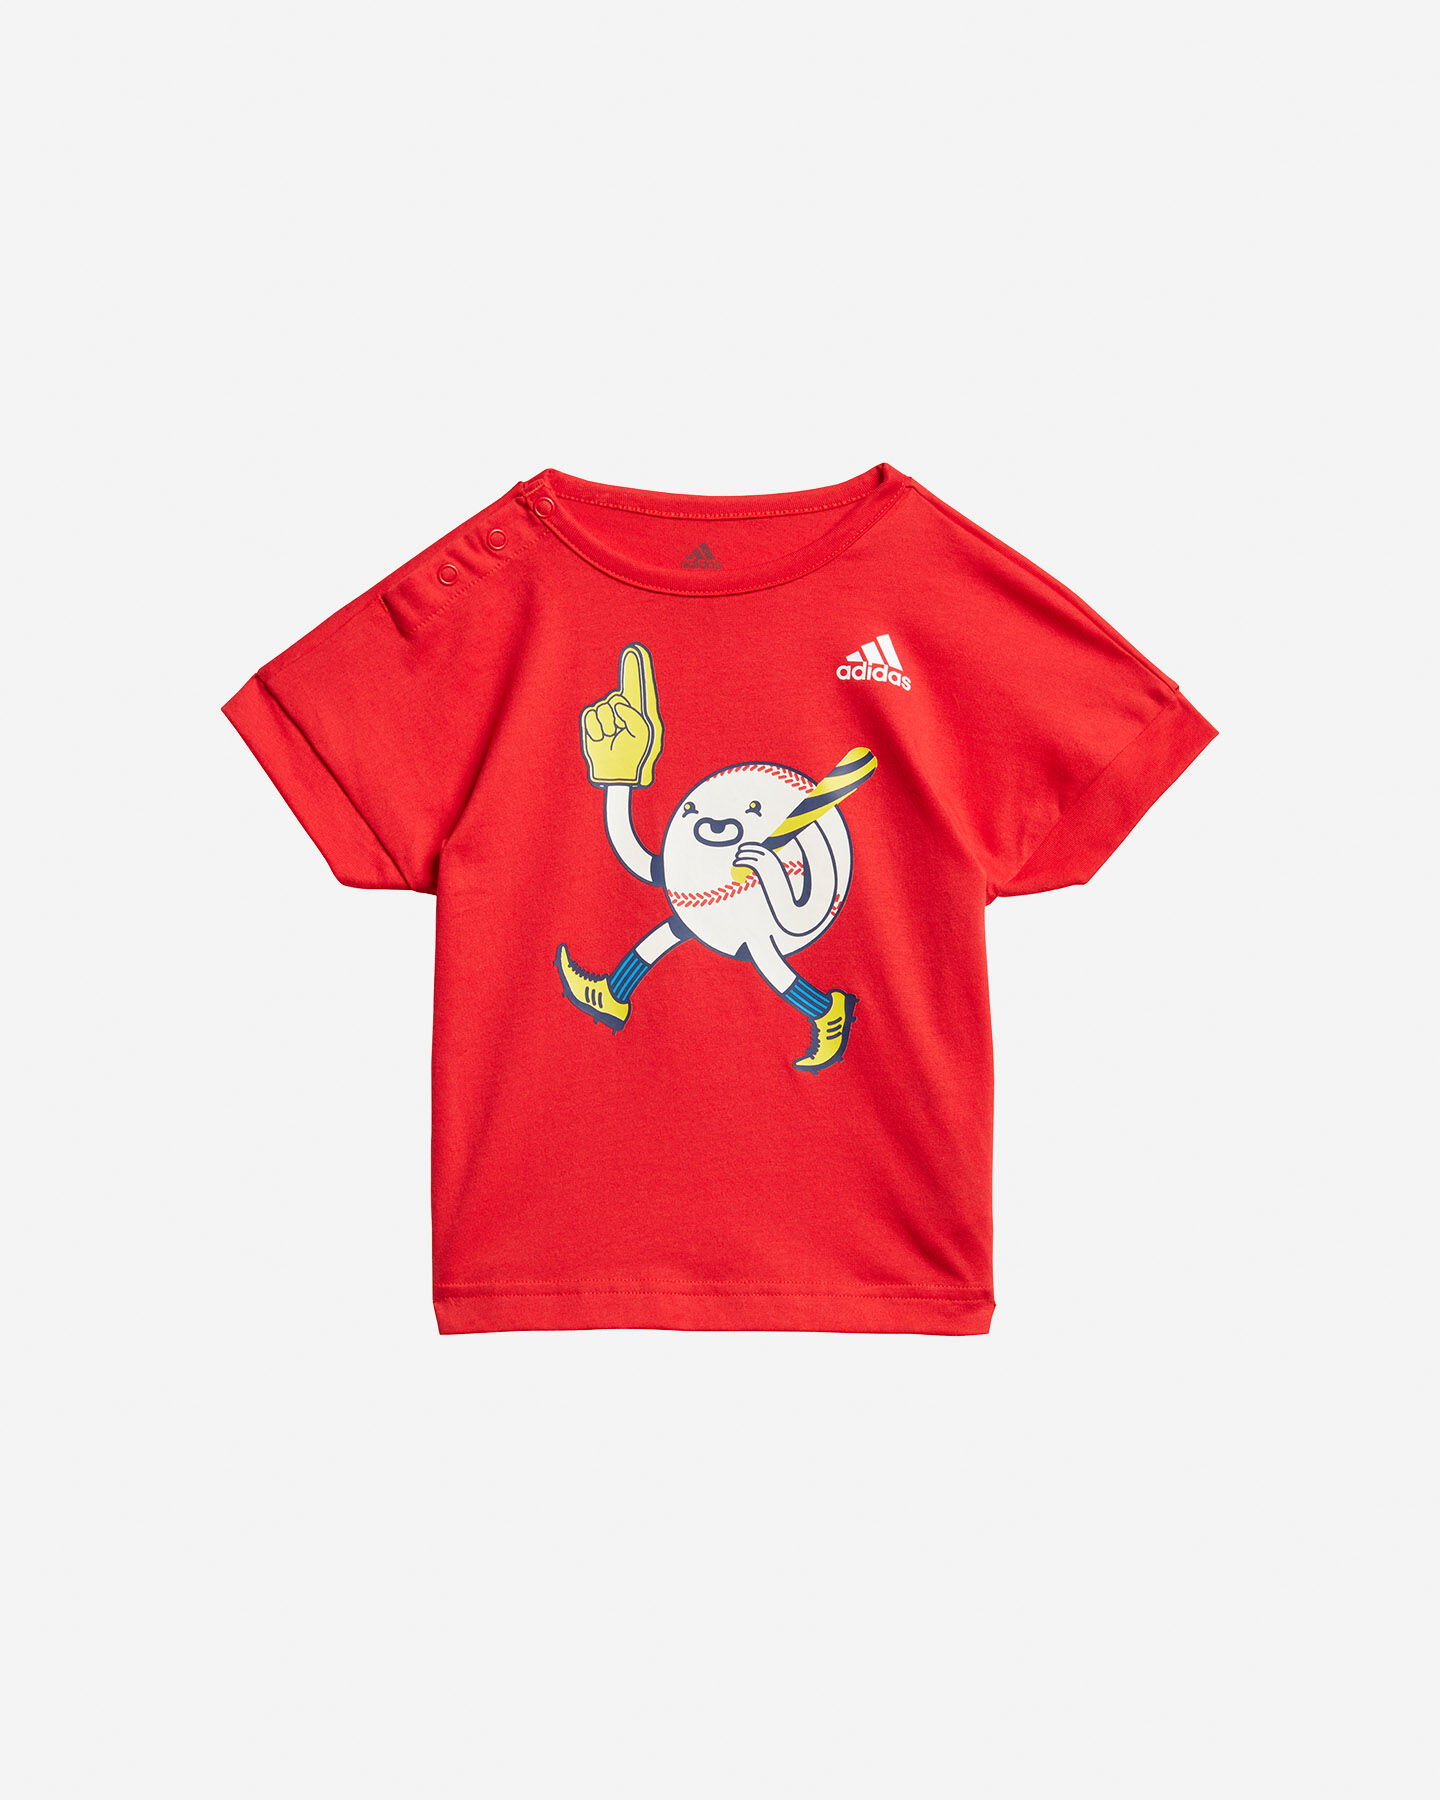  Completo ADIDAS CHARACTER JR S5149133|UNI|0-3M scatto 1